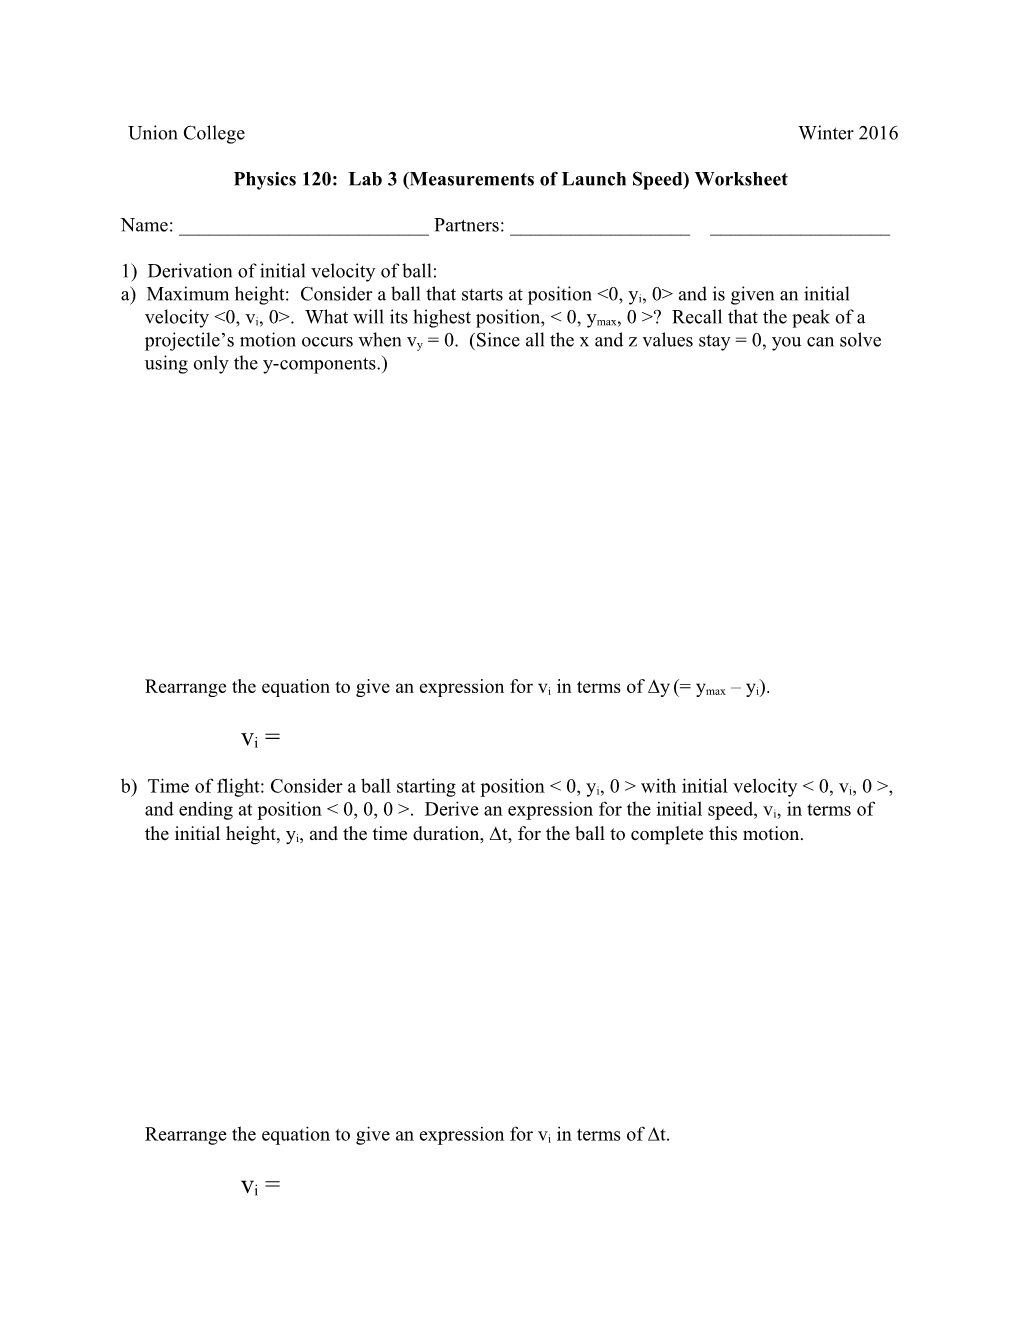 Physics 120: Lab 3 (Measurements of Launch Speed) Worksheet